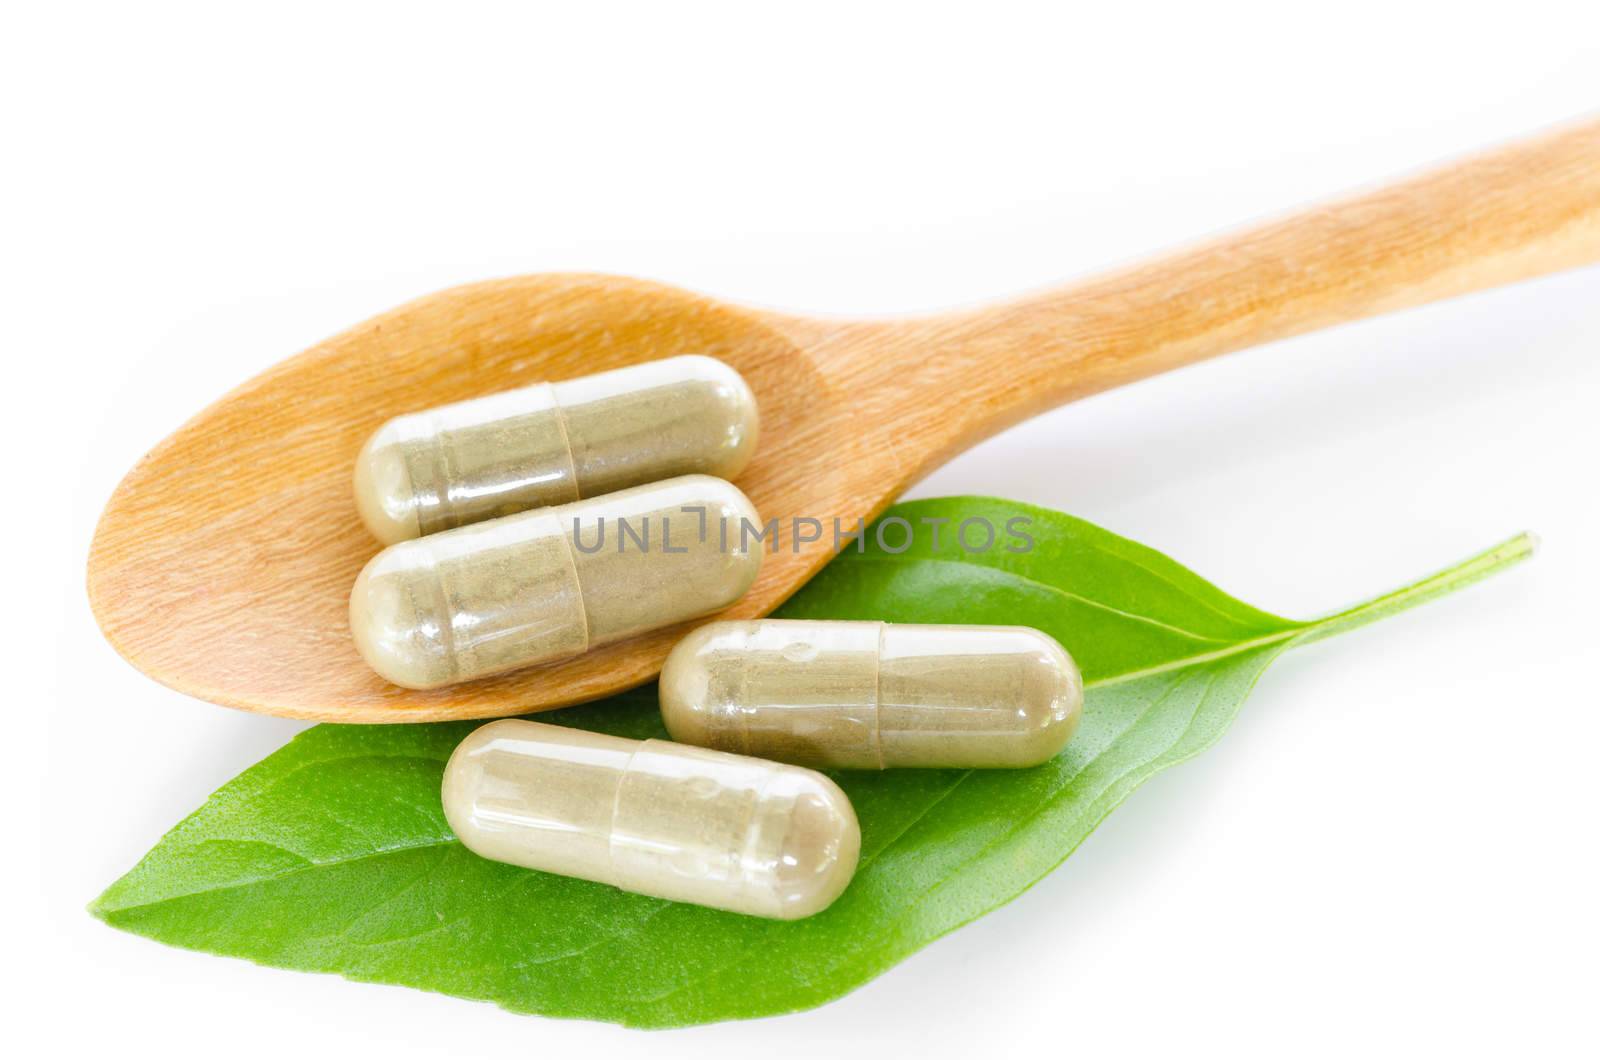 Yellow herb capsule with green leaf in wooden spoon on white background.